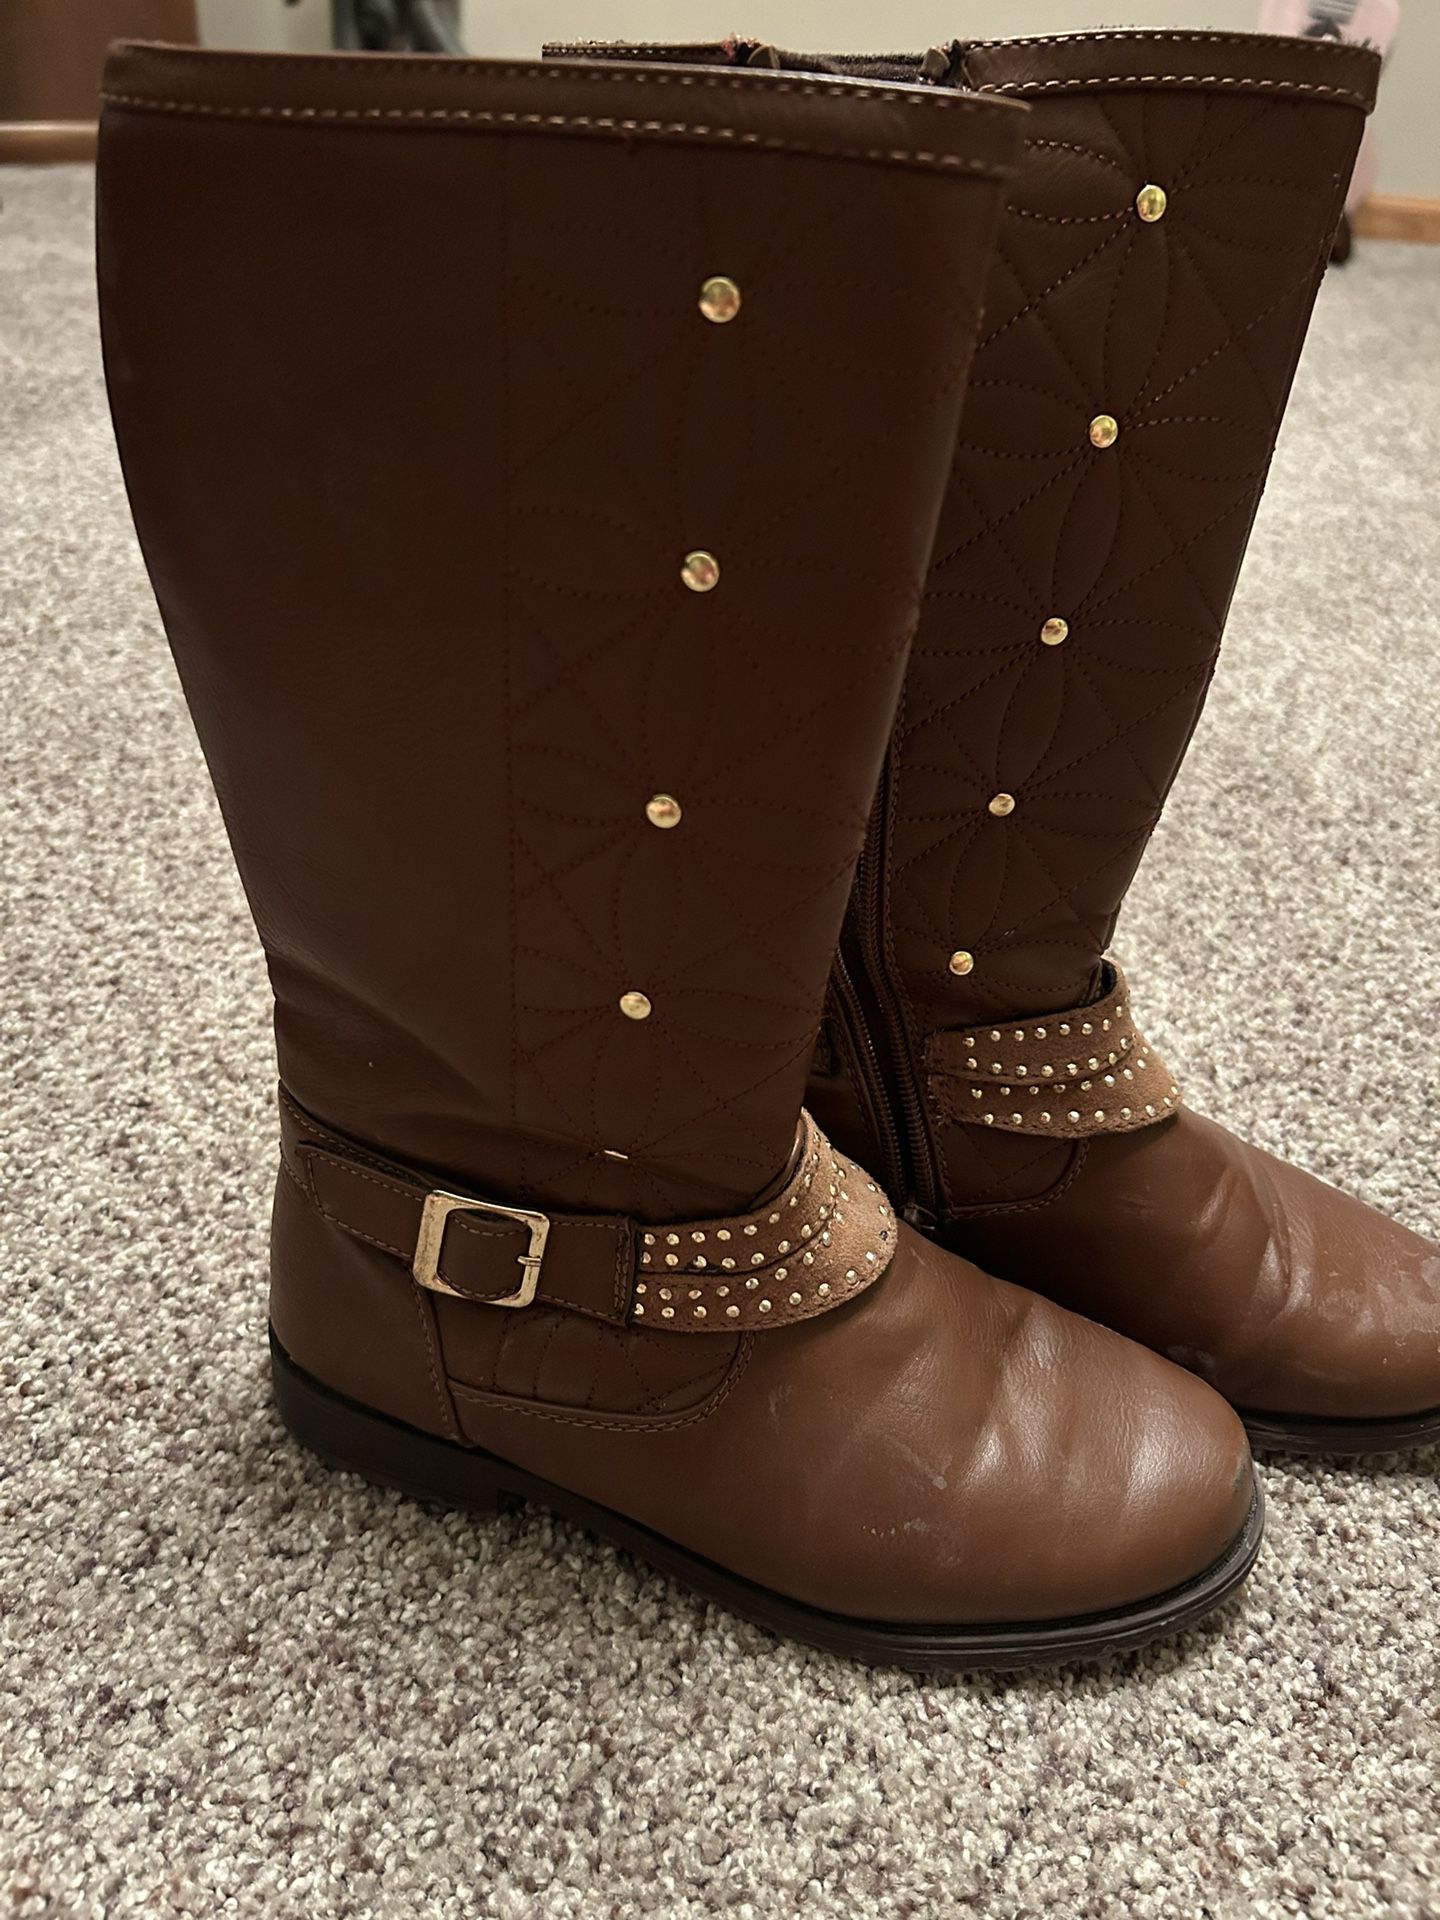 Girl’s Brown Riding boots, Size 3